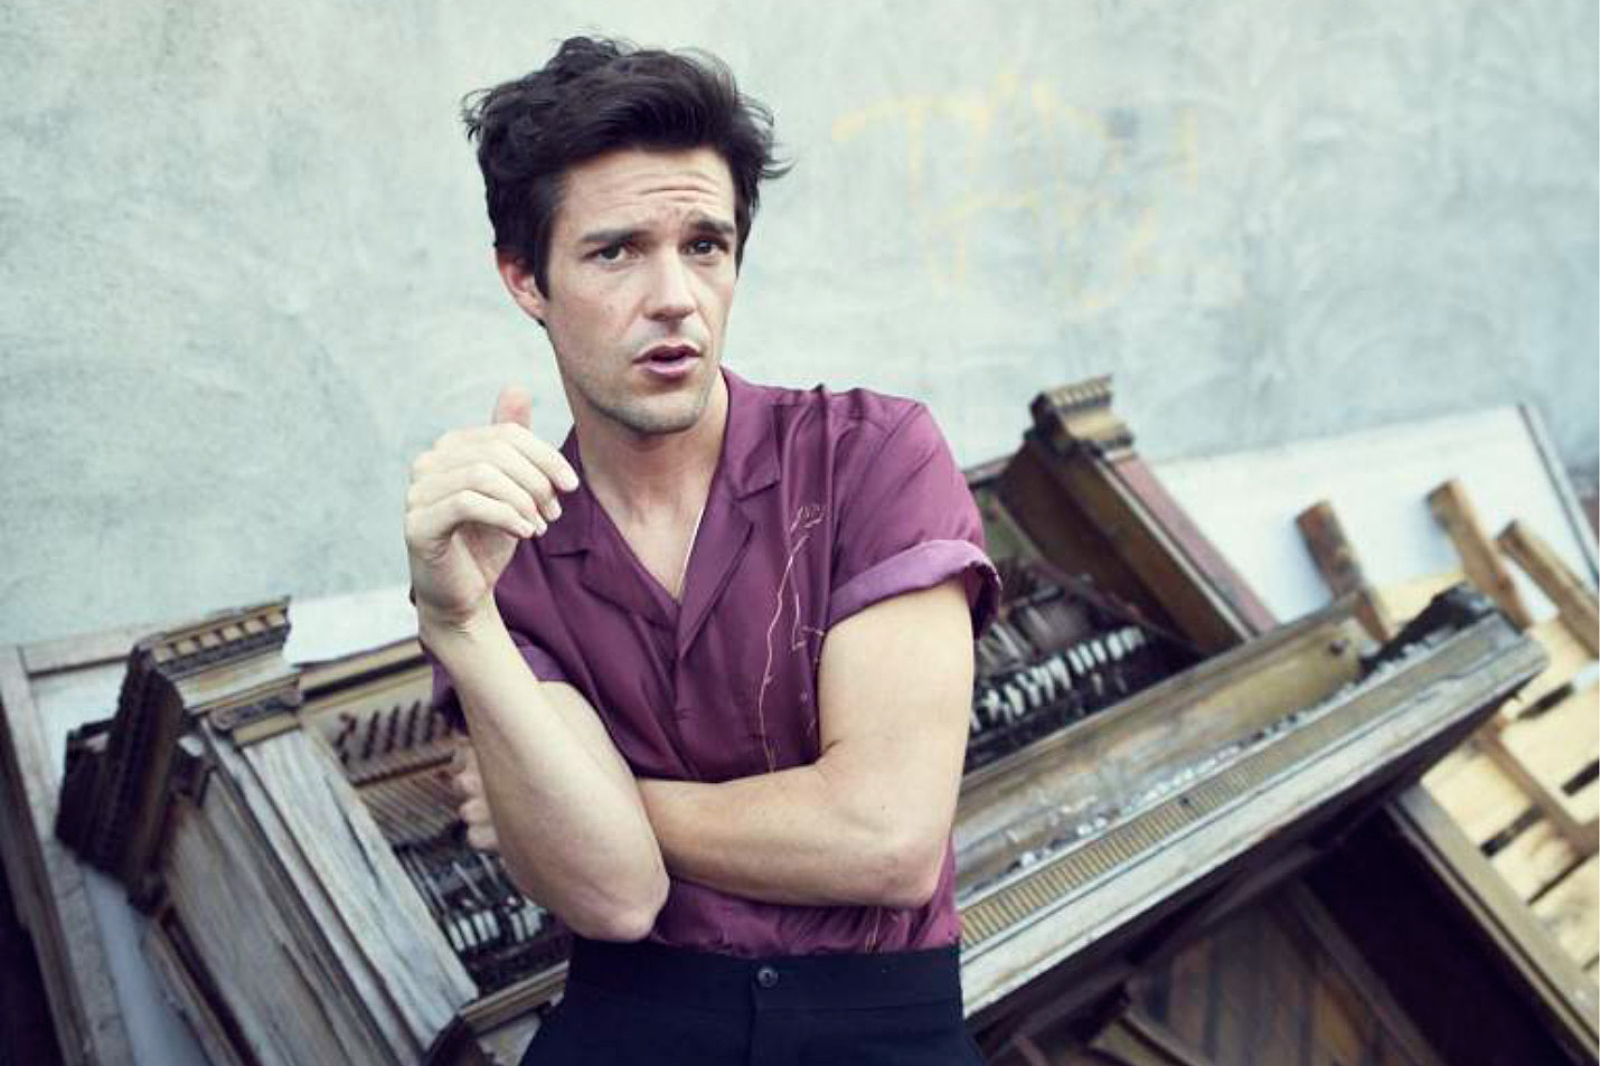 Watch Brandon Flowers play new song 'Come Out With Me' live